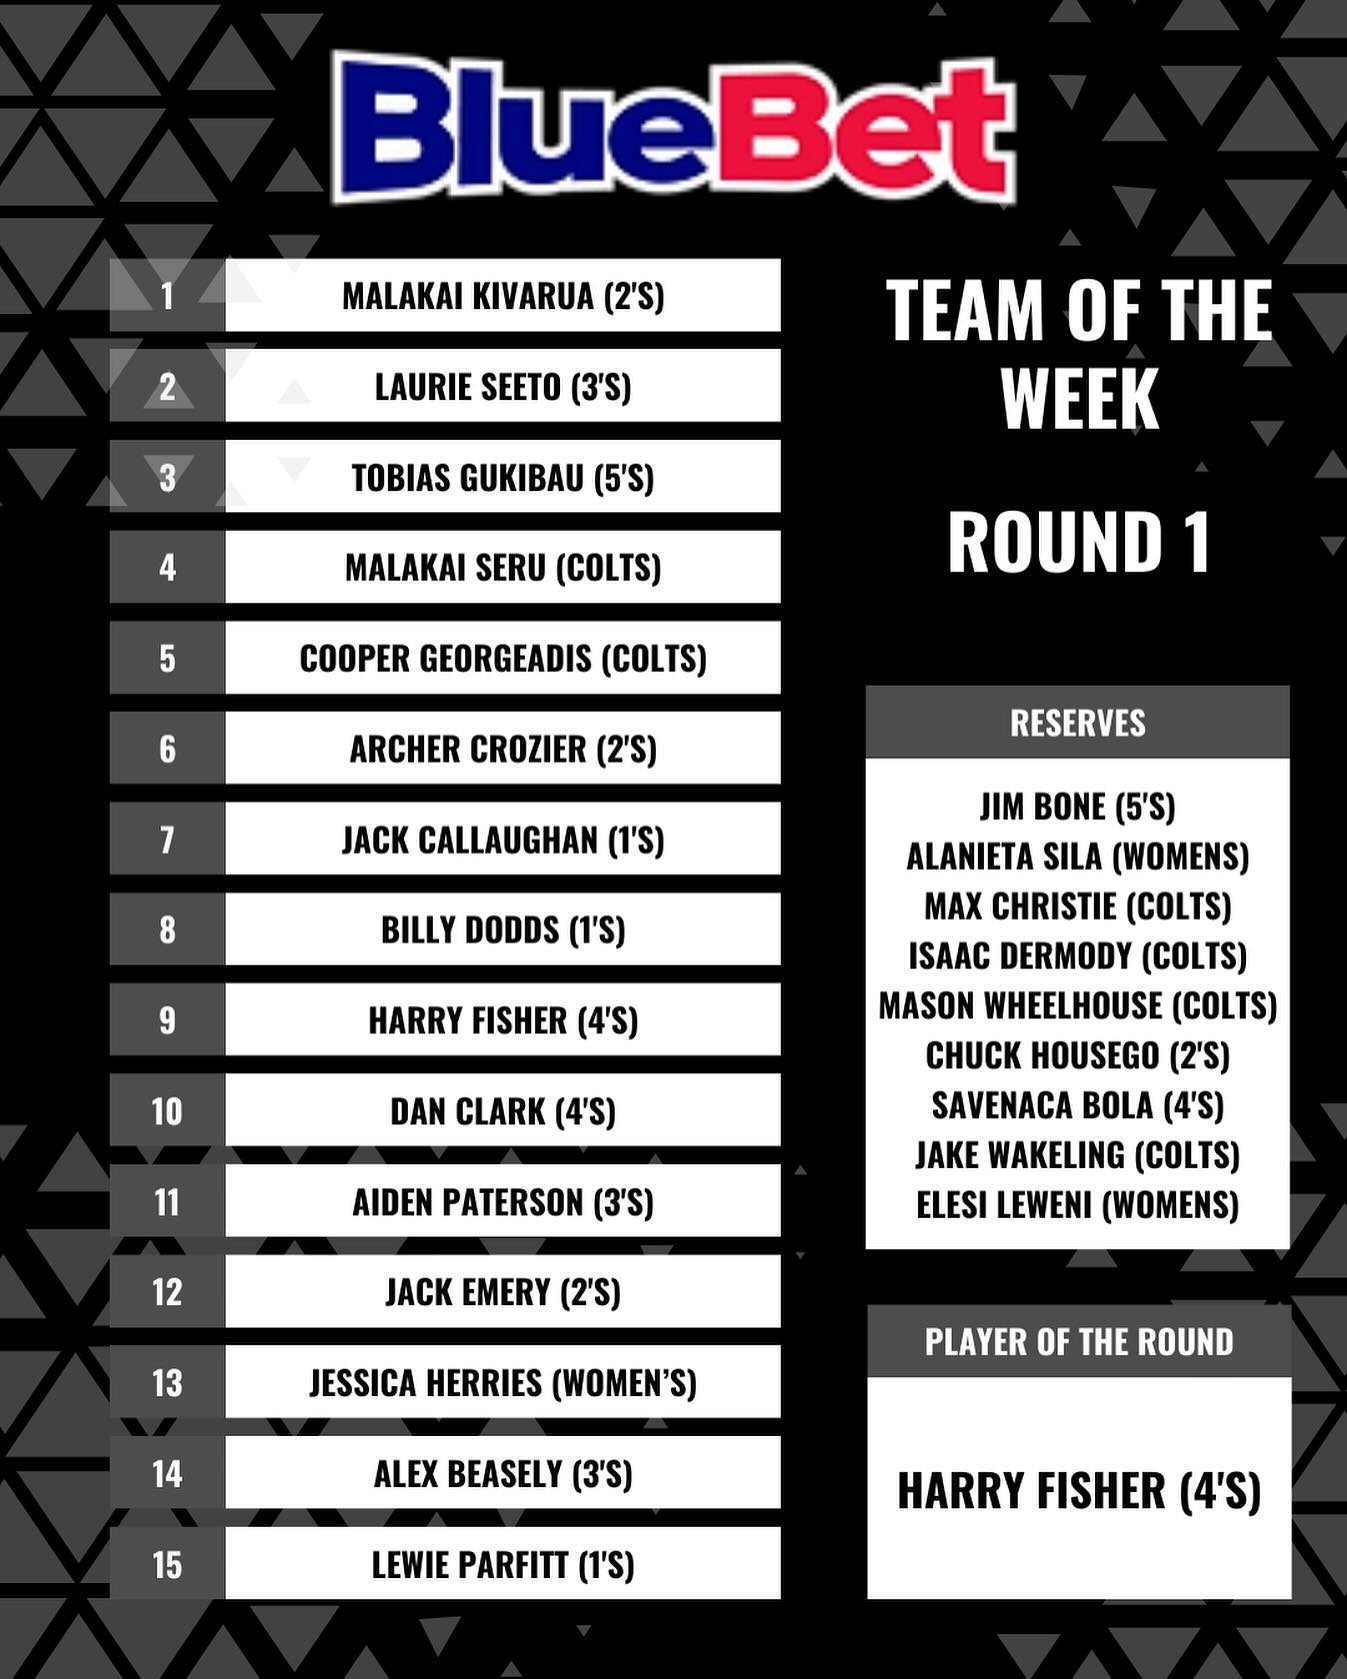 Here it is - Round 2 @bluebetcomau TEAM OF THE WEEK!  Congratulations to all players - especially @harryfisherrr - our PLAYER OF THE ROUND!!